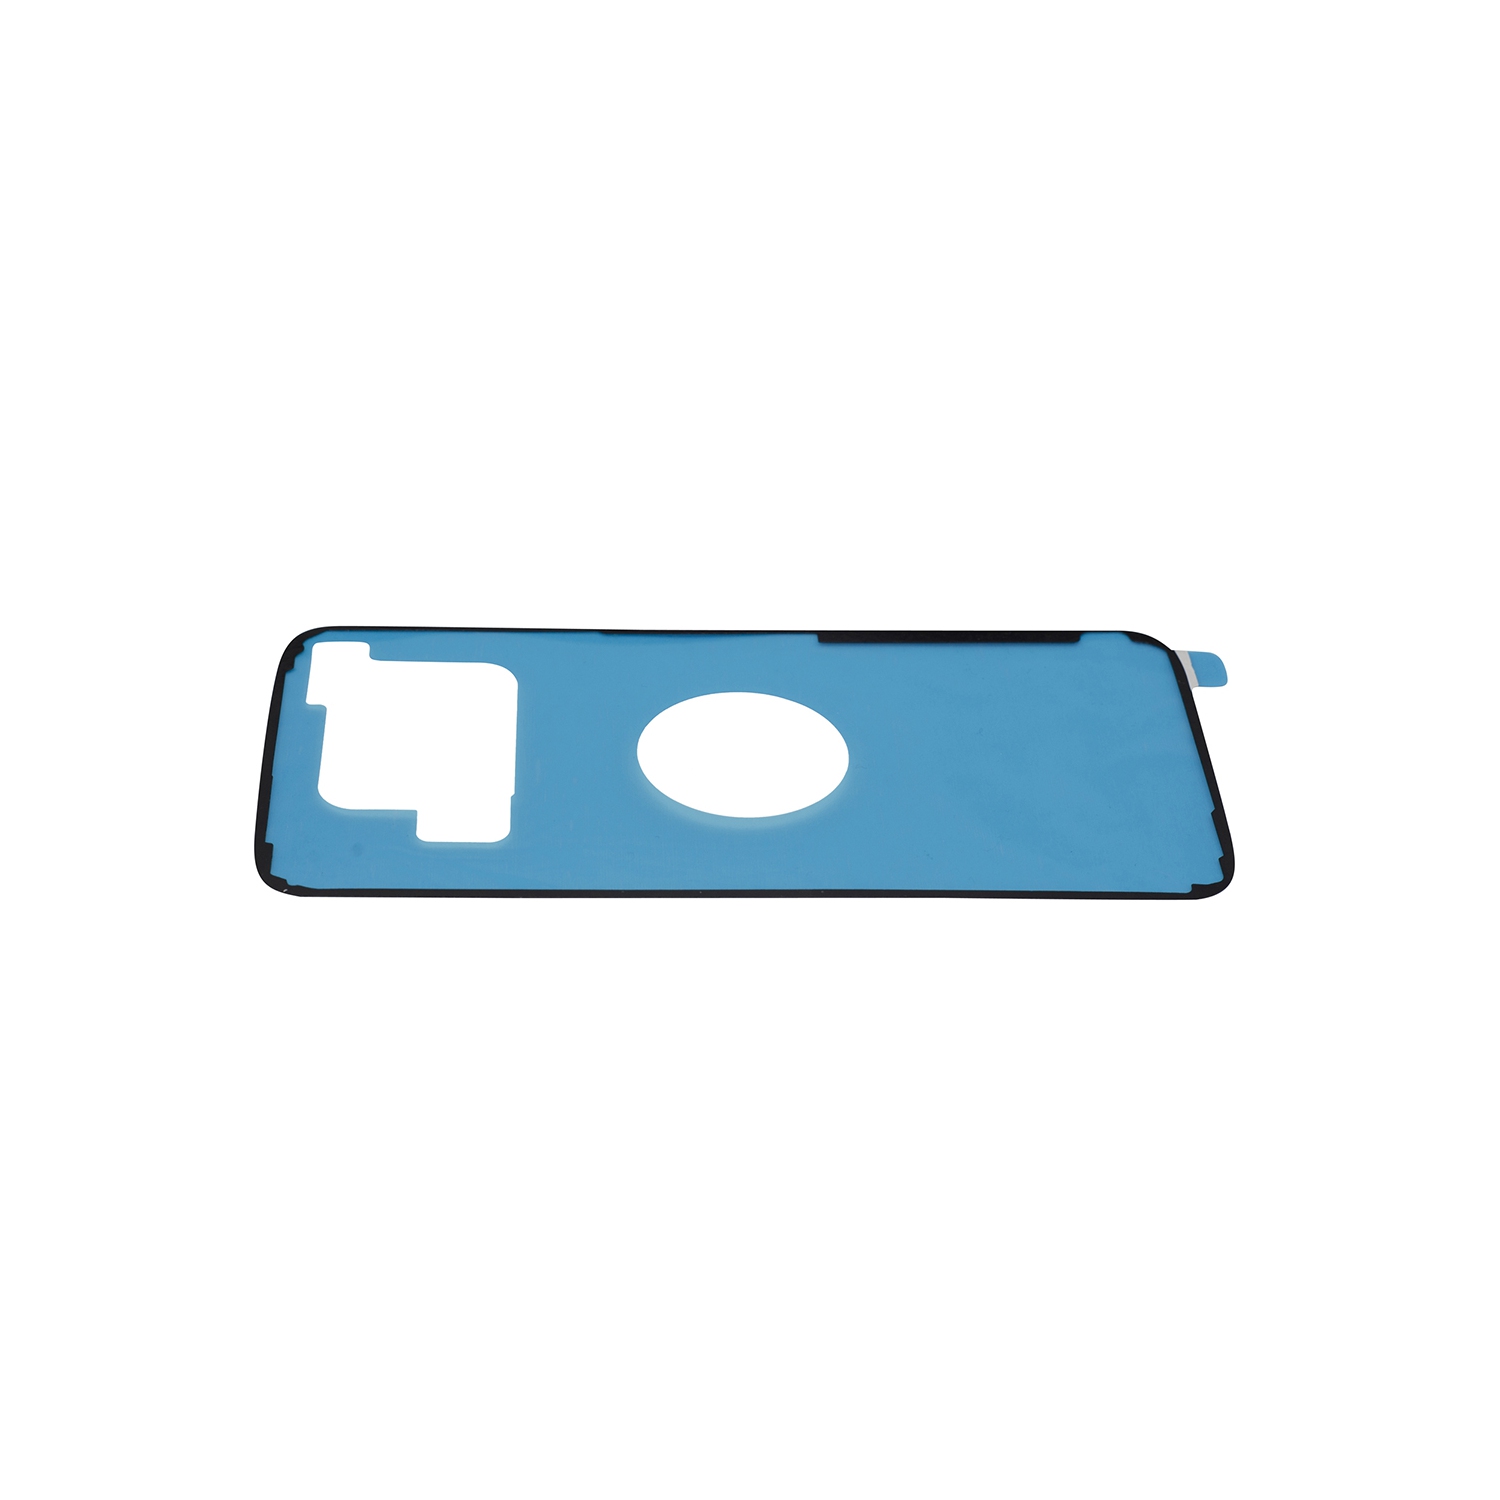 Samsung Galaxy S7 Edge G935W8 Battery Door Adhesive Replacement